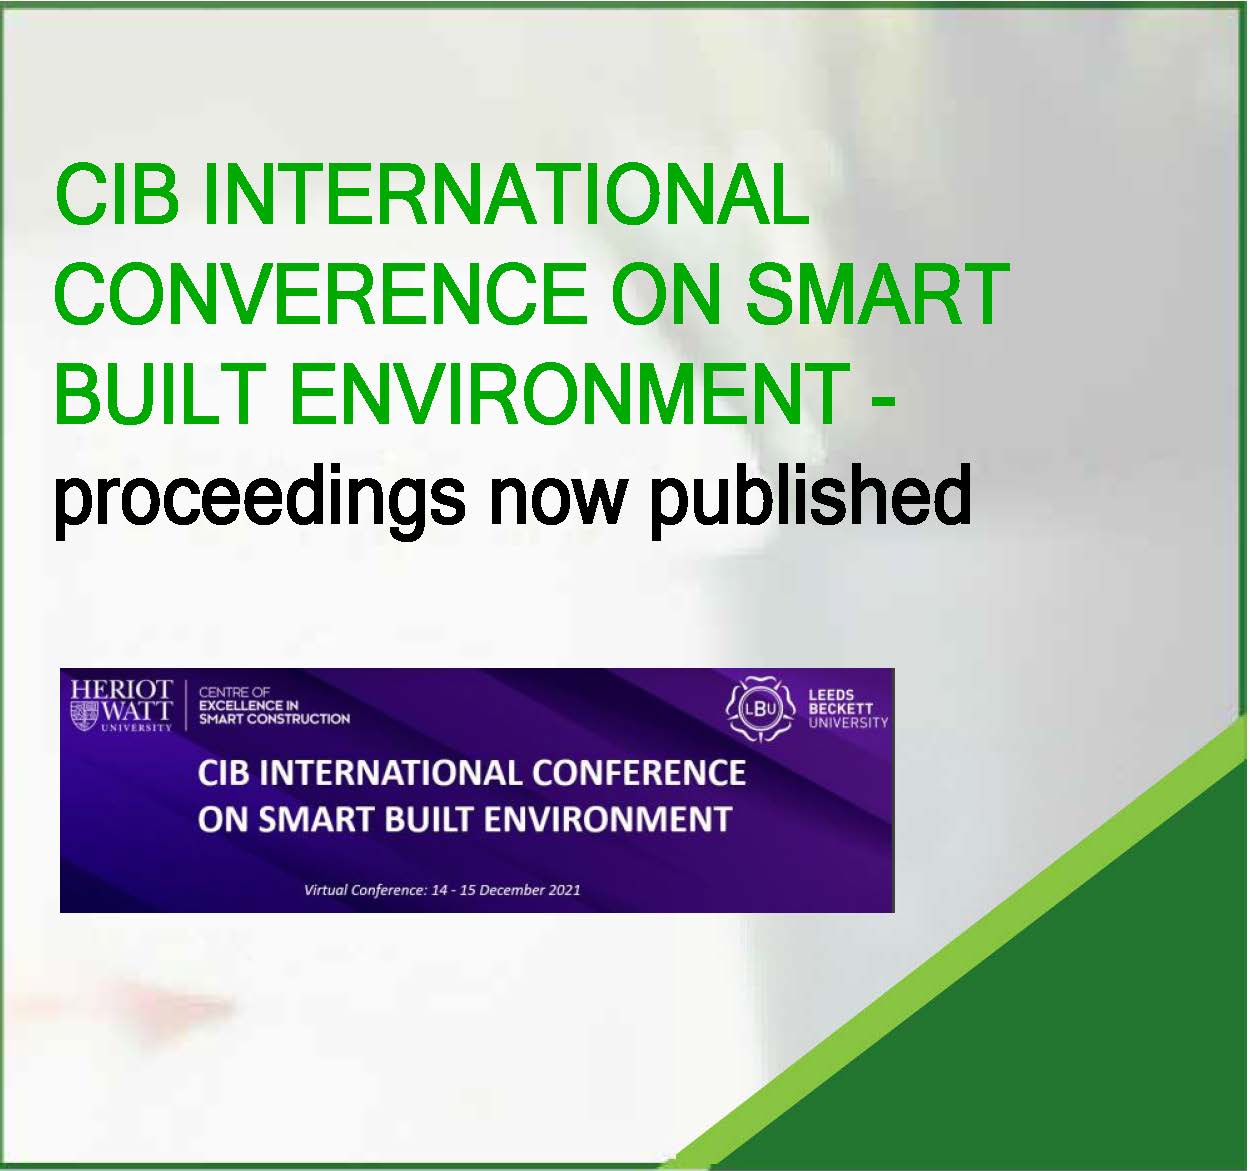 CIB International Conference on Smart Built Environment 14-15 December 2021 – proceedings now published